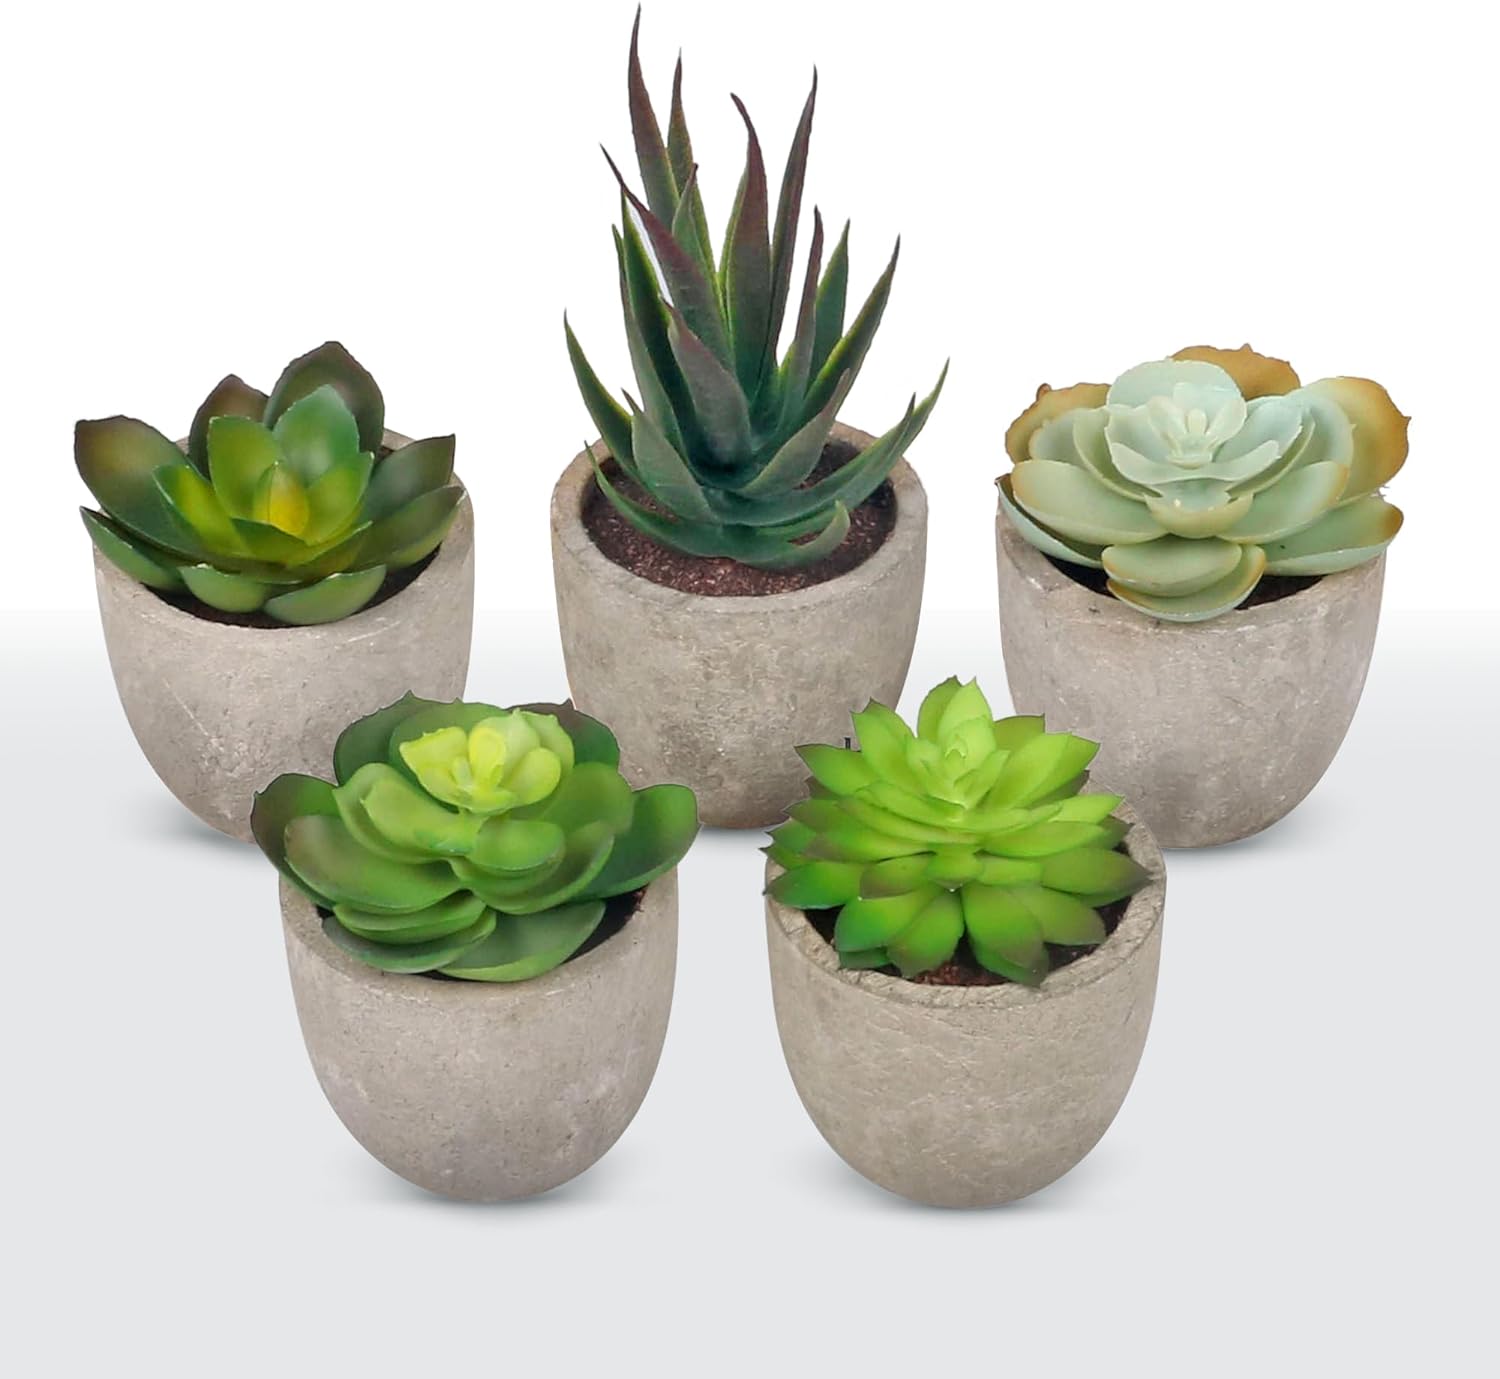 Artificial Succulents Plants-5 pcs Fake Plant Succulent Pots-Realistic Textured Succulent Fake Plants -Office and Home Decor Small Artificial Plants in Pots